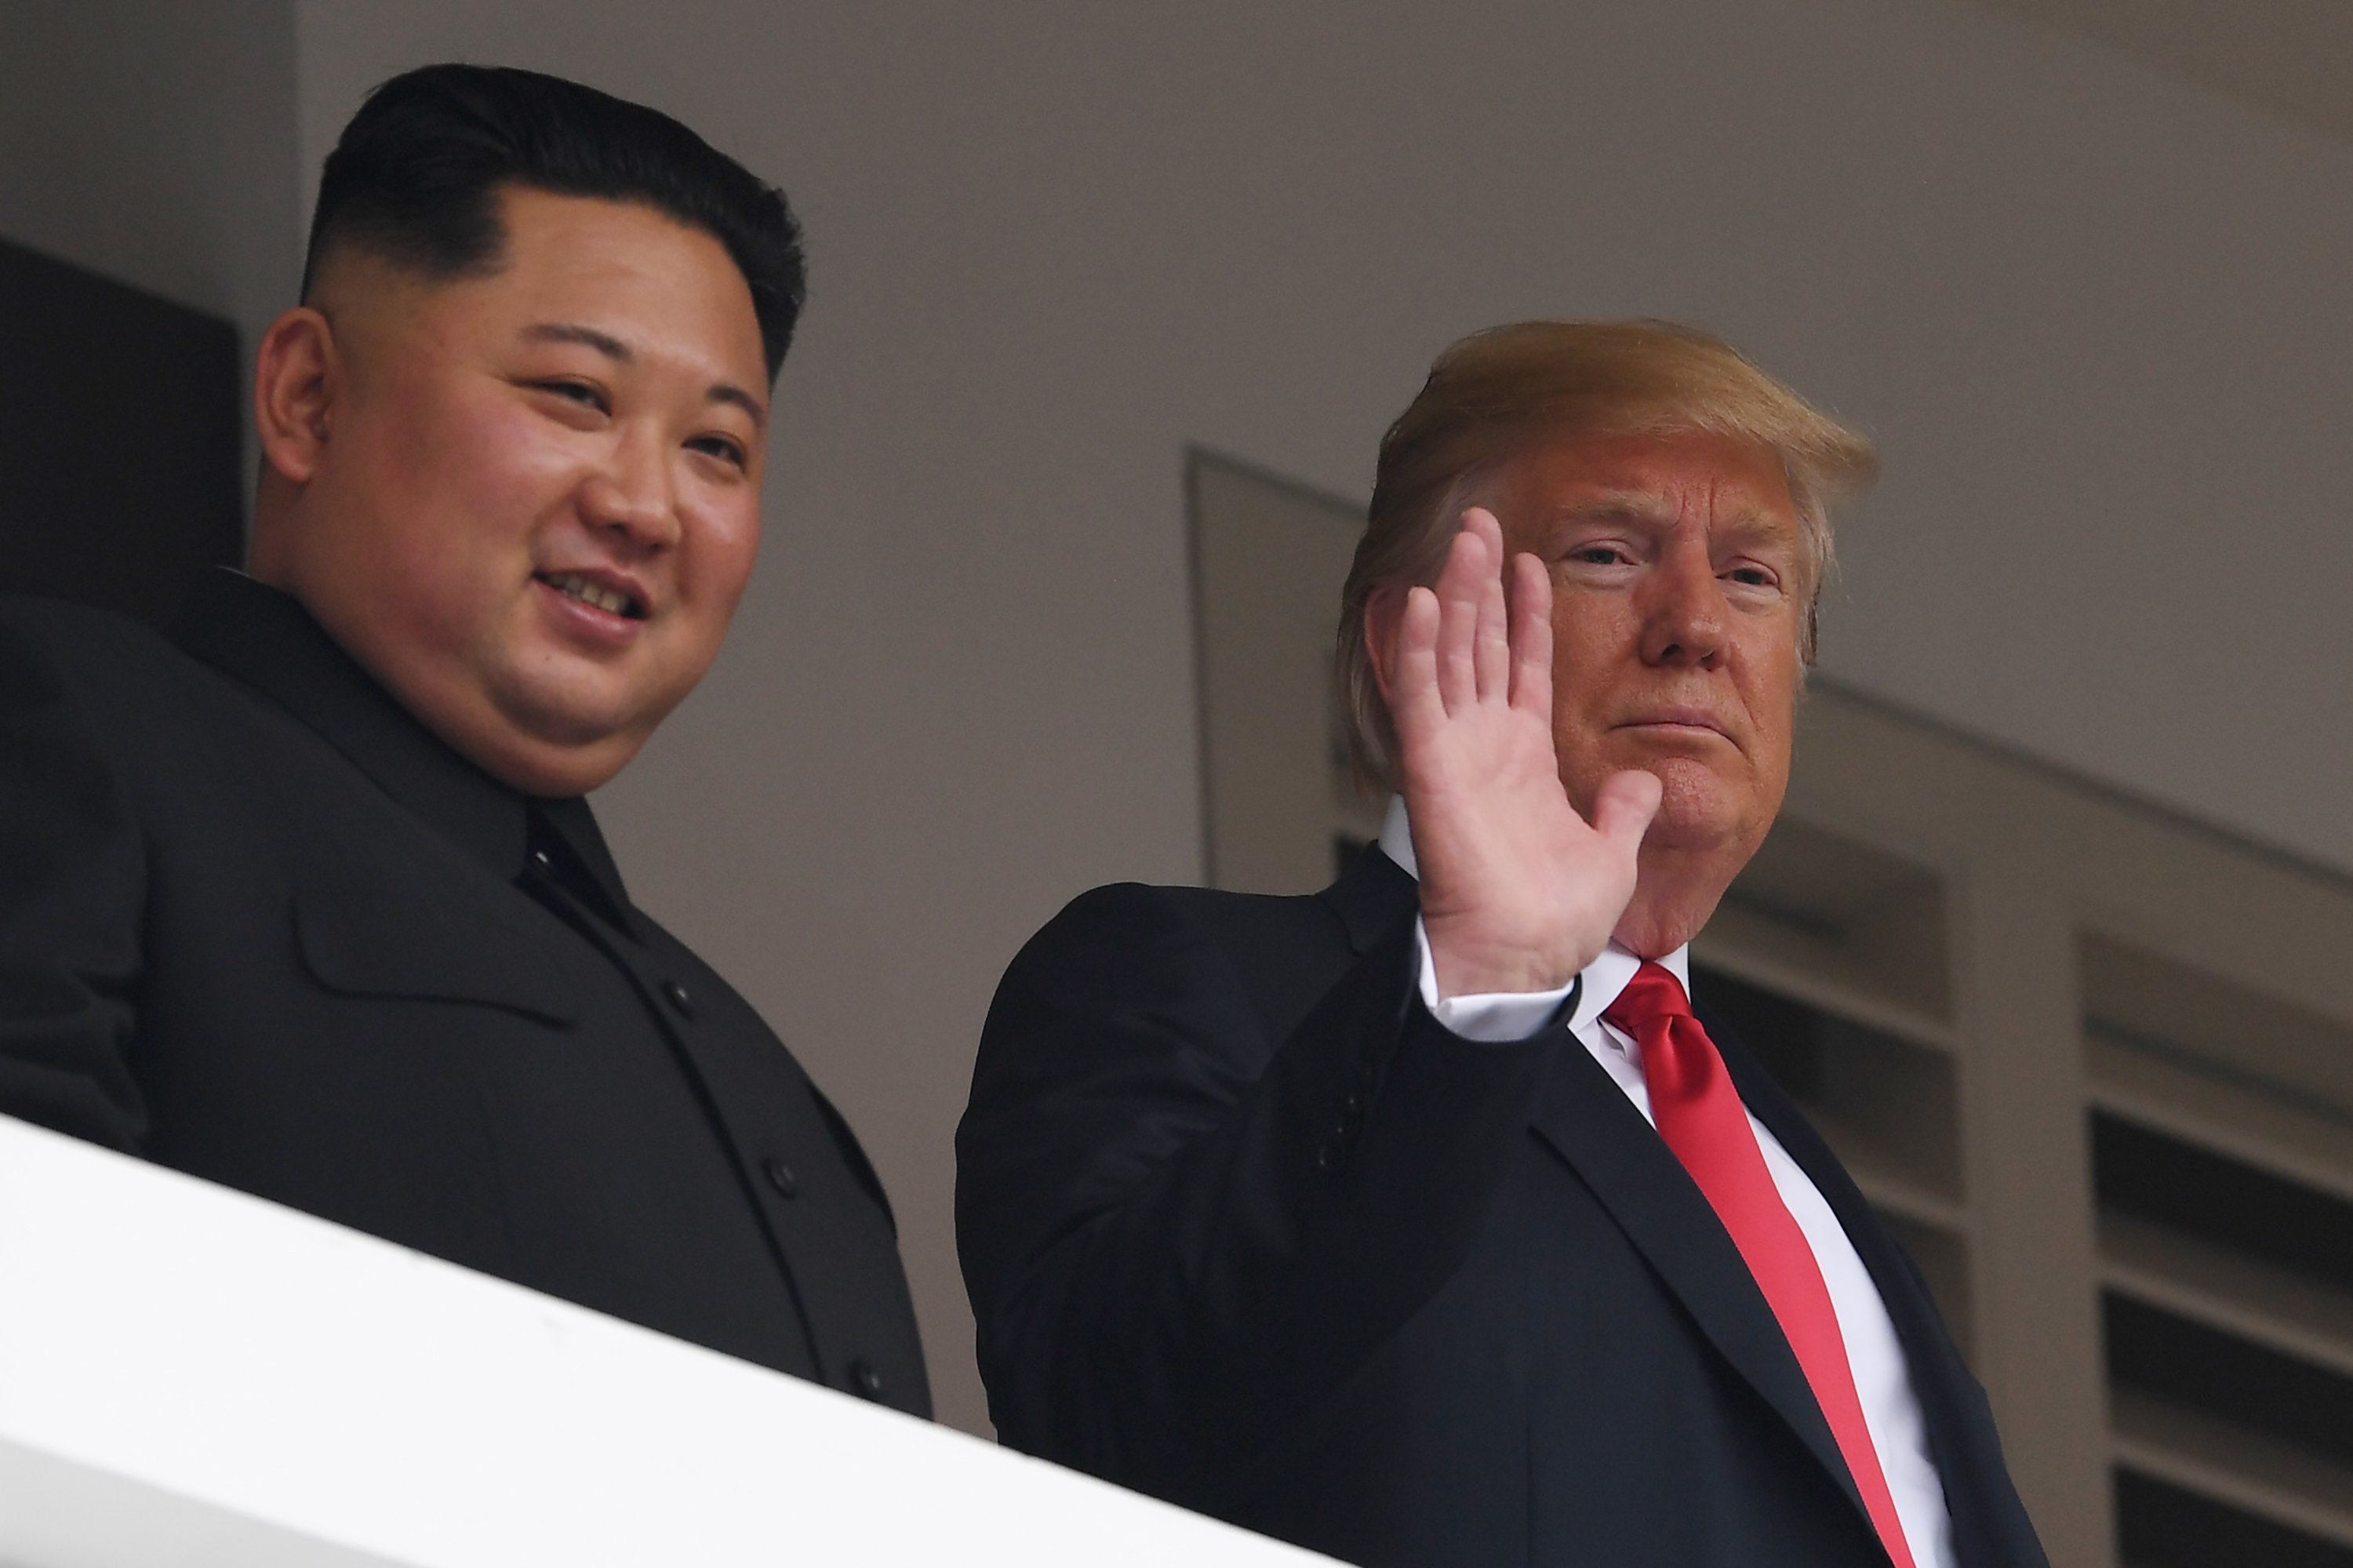 June 12: US President Donald Trump waves as he and North Korea's leader Kim Jong Un look on from a veranda during their historic US-North Korea summit in Singapore (Saul Loeb&mdash;AFP/Getty Images)